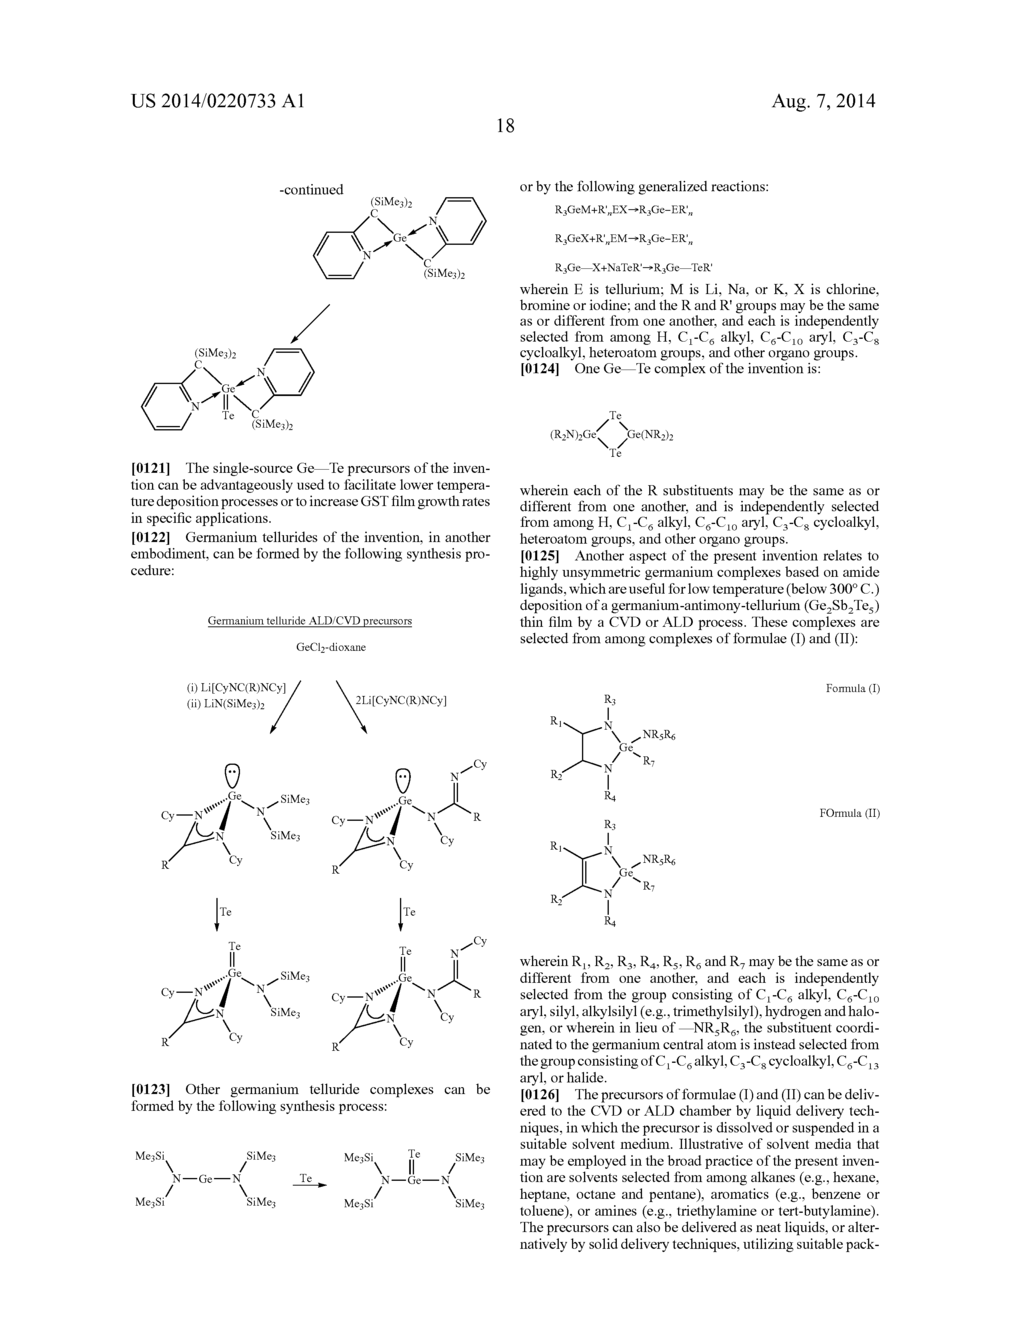 ANTIMONY AND GERMANIUM COMPLEXES USEFUL FOR CVD/ALD OF METAL THIN FILMS - diagram, schematic, and image 24